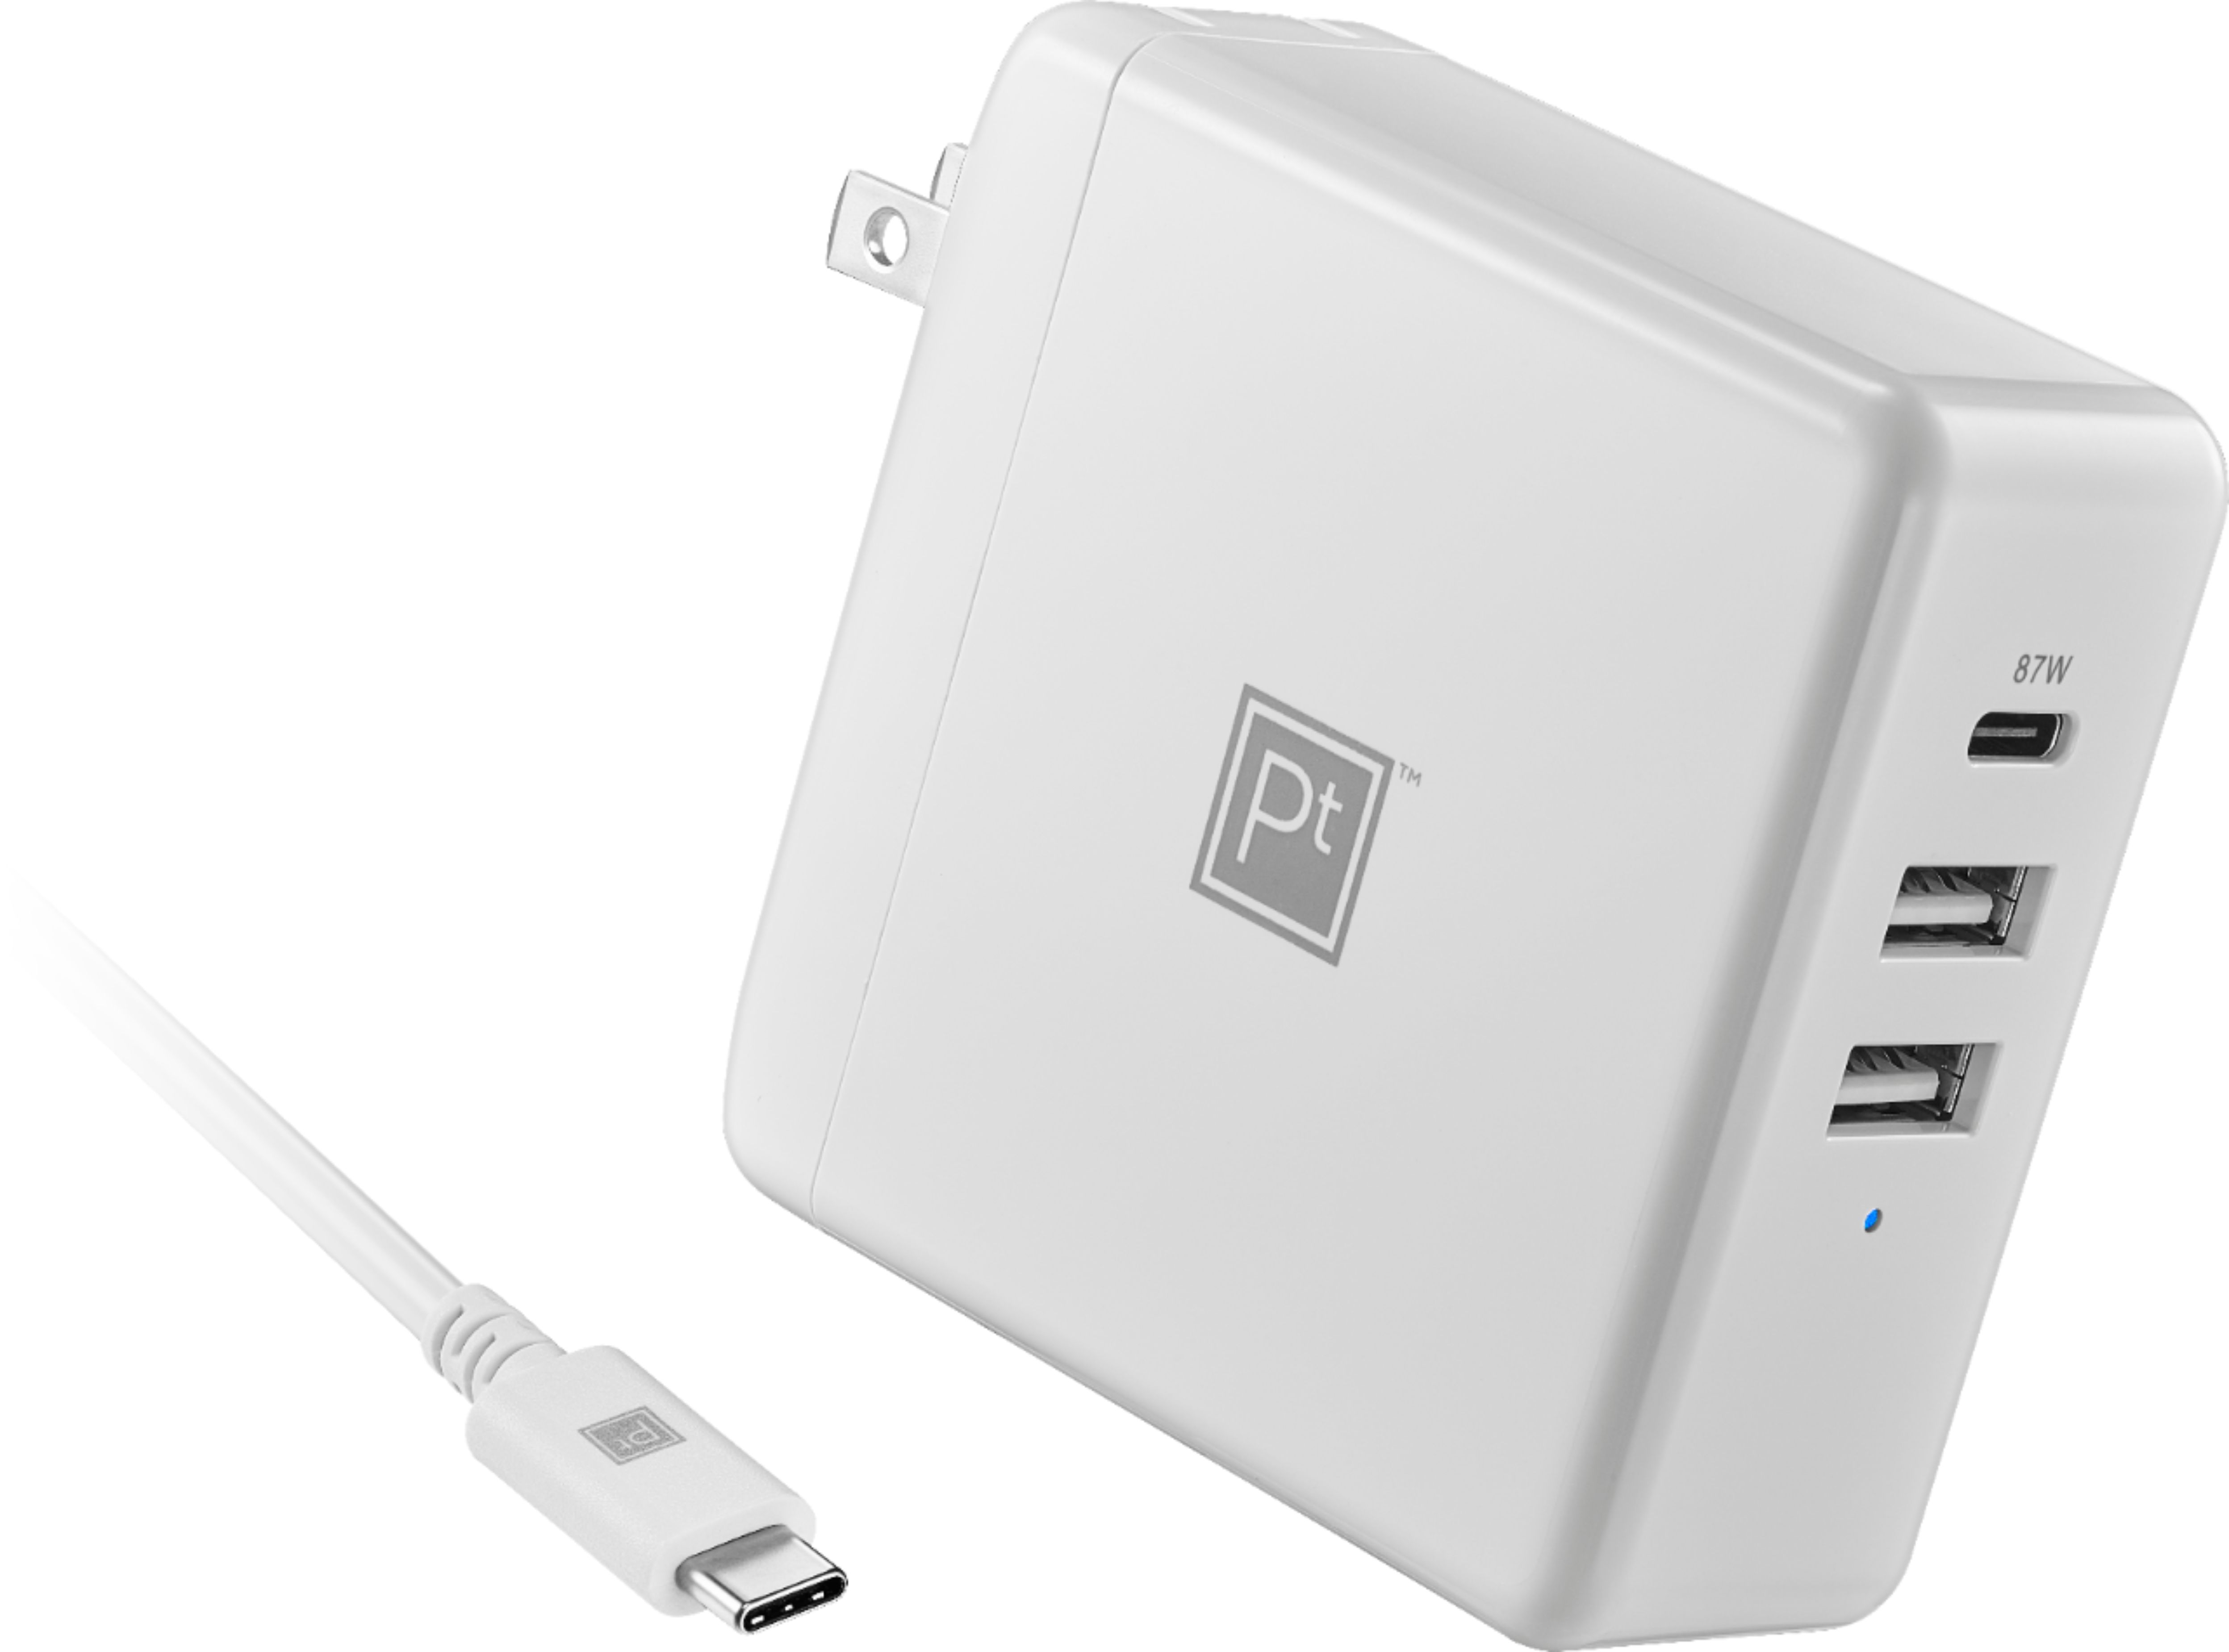 Best Buy: Platinum™ 95W 8' USB-C 3-Port Wall Charger with 87W USB-C Power Delivery for MacBook, iPad, iPhone, Chromebook or USB-C PT-PAC90C2U